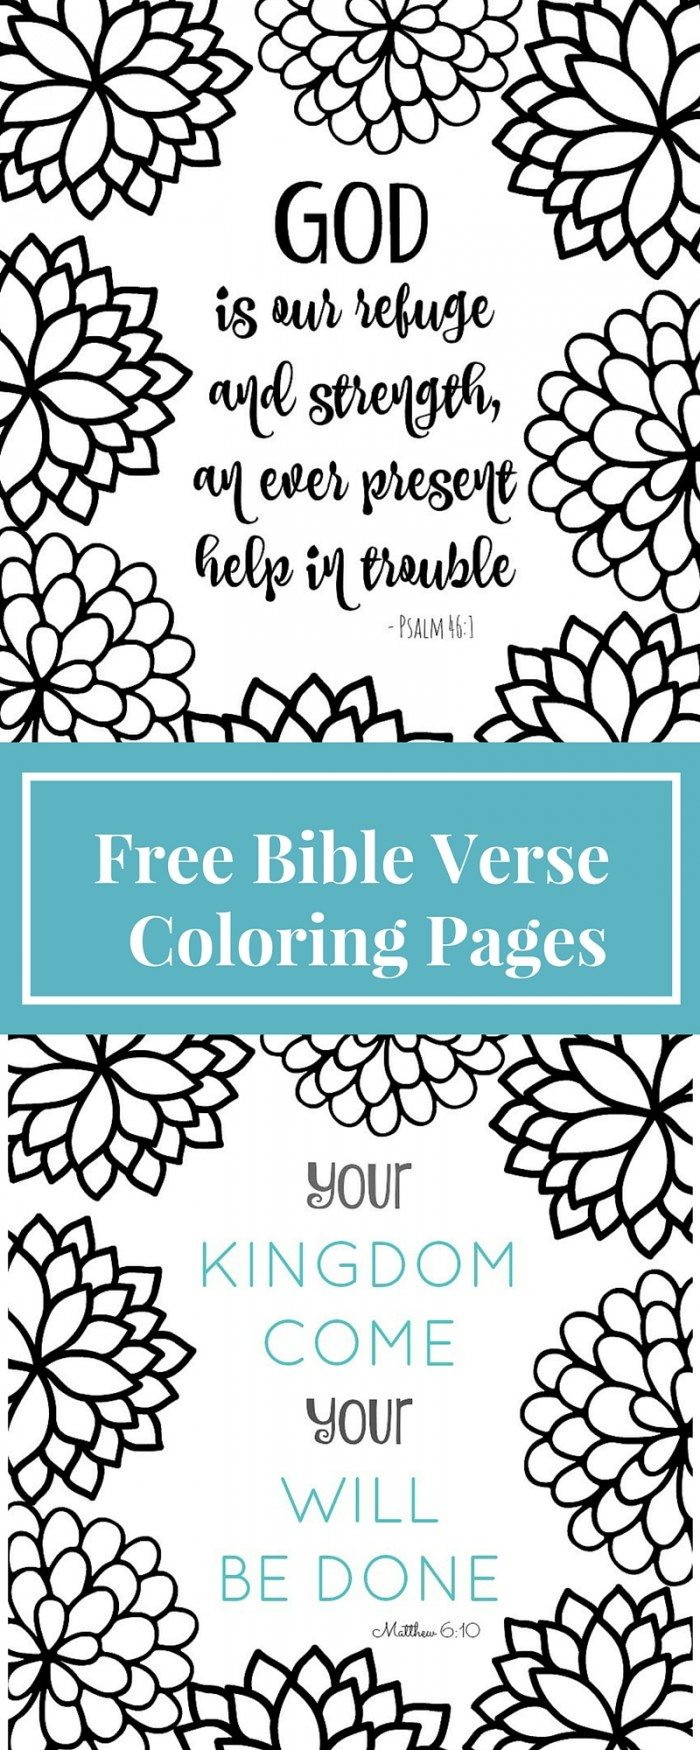 Printable Bible Coloring Pages With Verses
 FREE Bible Verse Coloring Pages